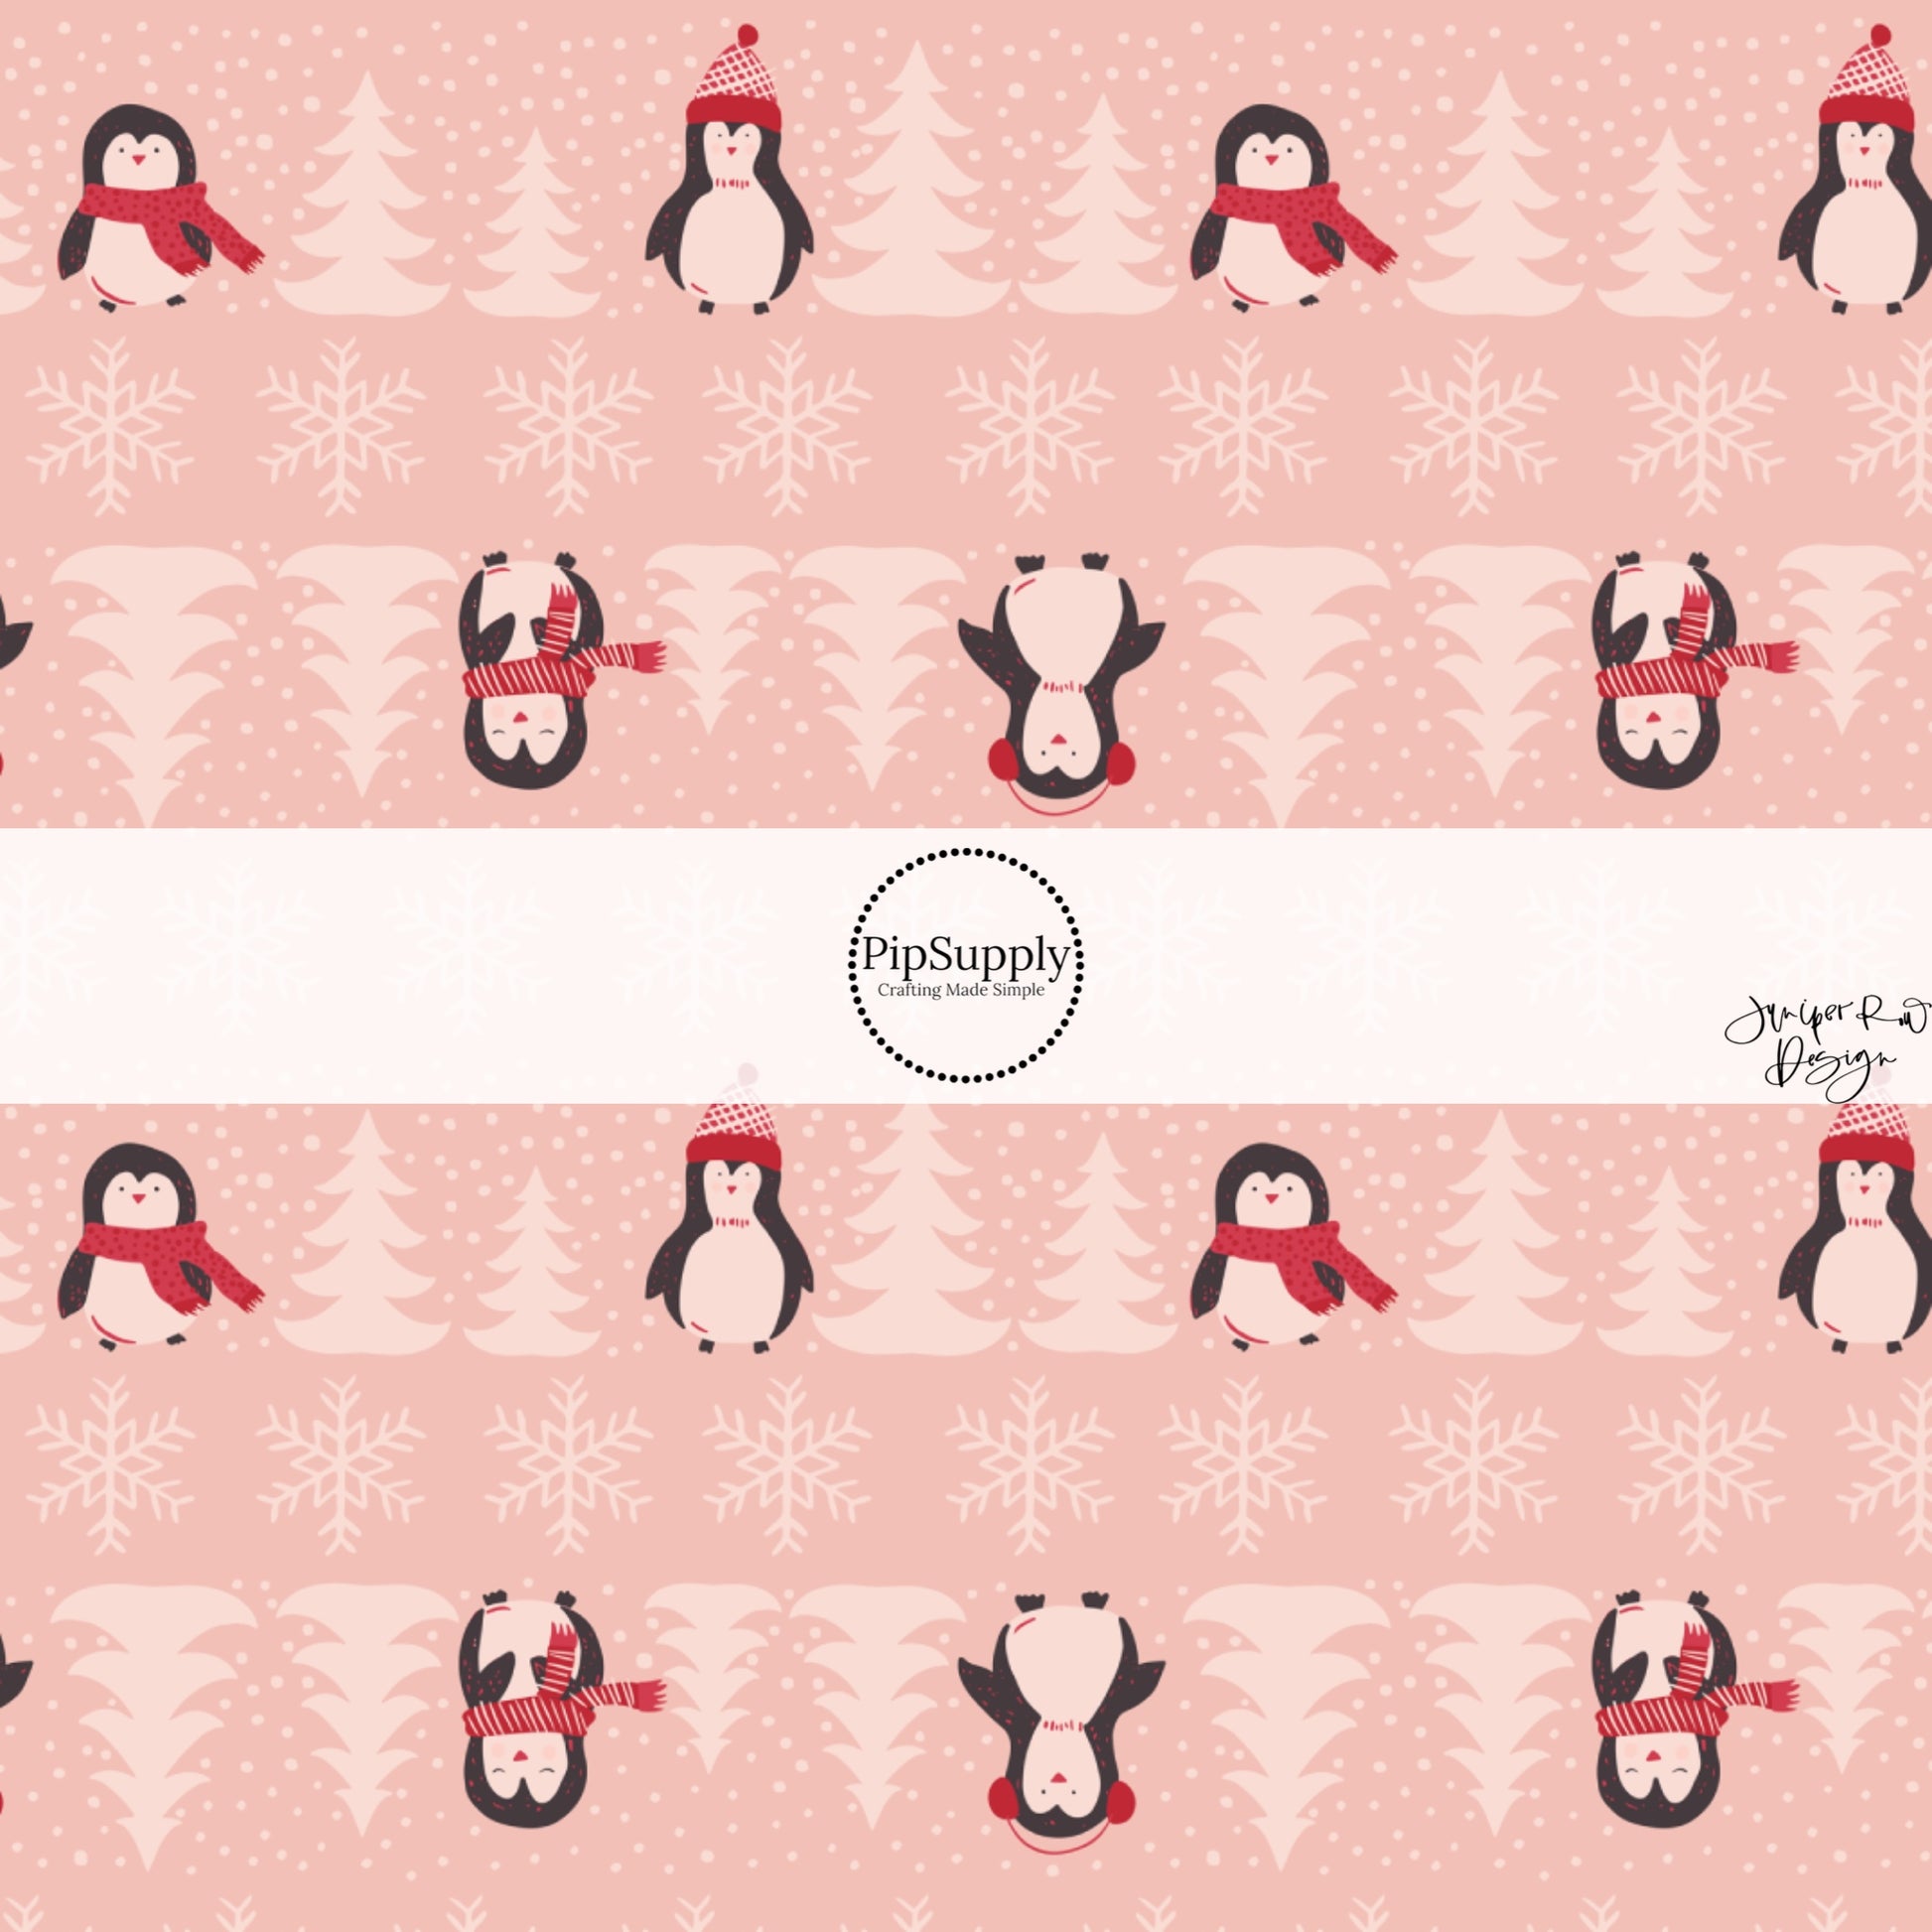 These holiday pattern themed fabric by the yard features penguins with scarves and hats surrounded by pine trees and snowflakes on pink. This fun Christmas fabric can be used for all your sewing and crafting needs!